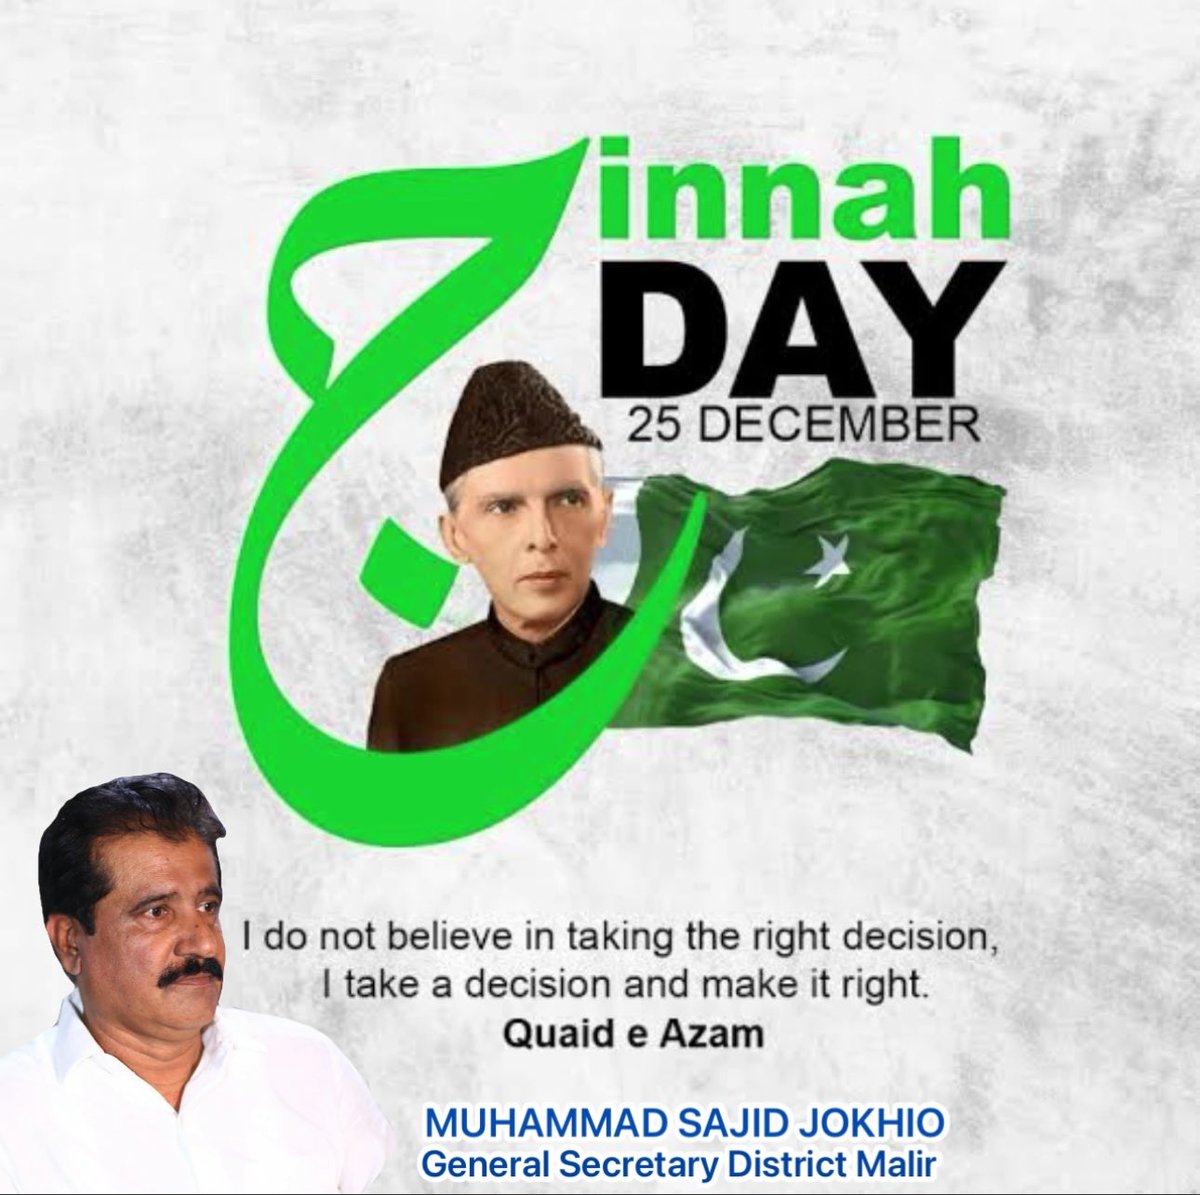 On this #Quaid_E_Azam Day, let's honor the legacy of our founding father and reflect on the values he stood for: unity, equality, and freedom. Let's work together to build a strong and prosperous #Pakistan. #QuaidDay #PakistanZindabad